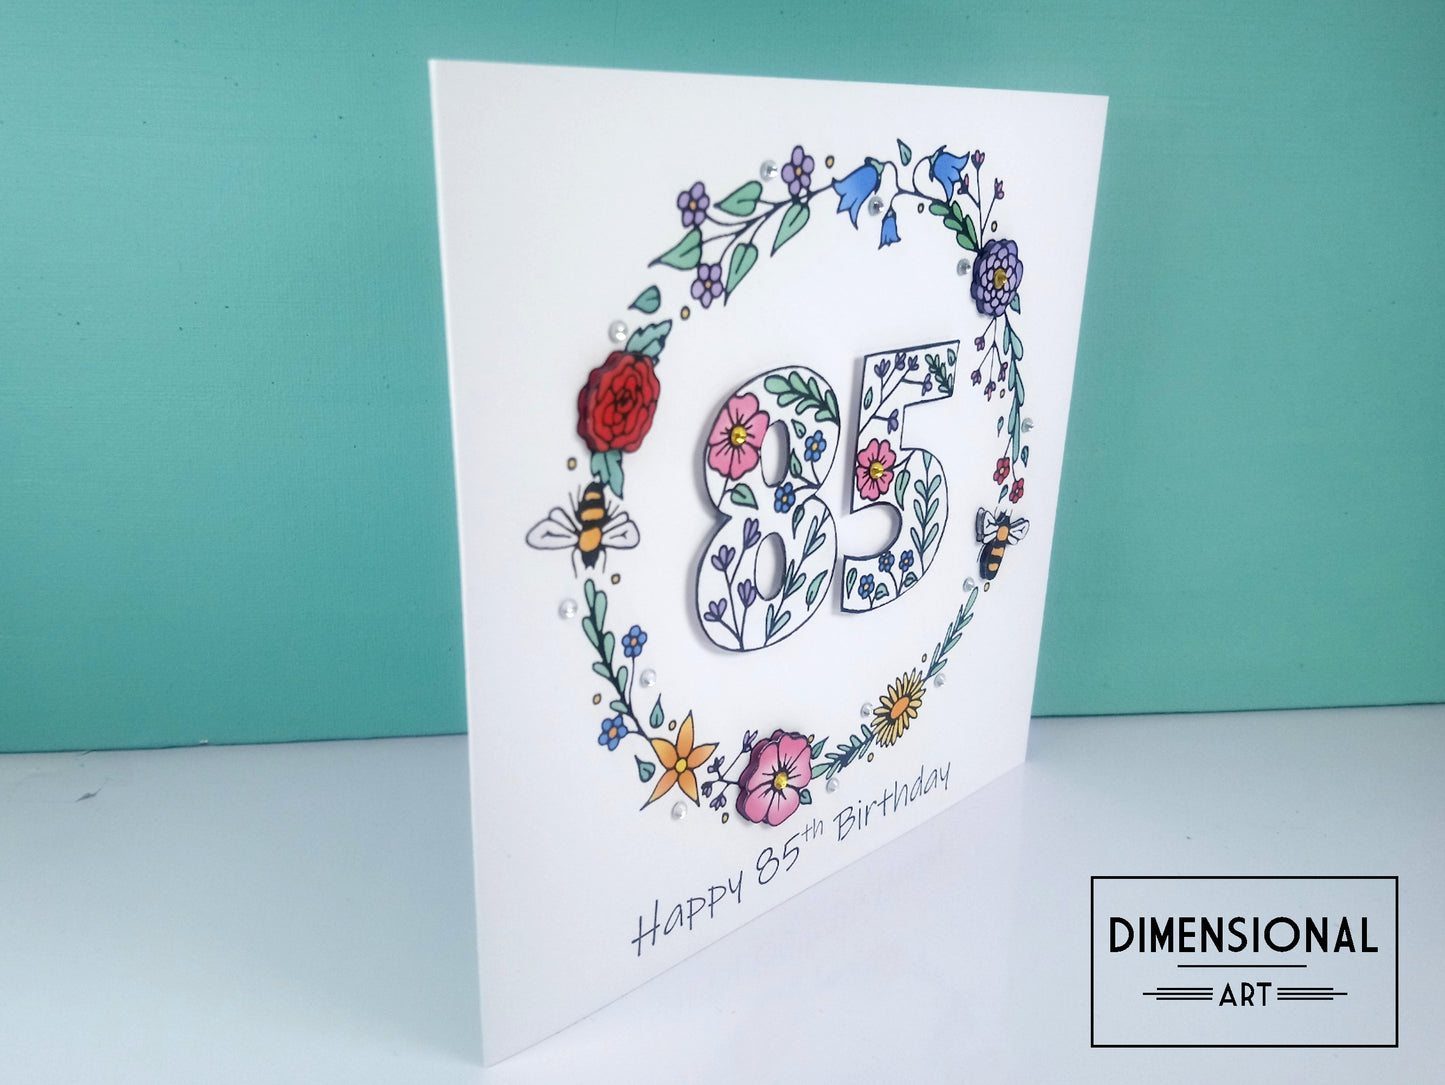 85th Flowers and Bees Birthday Card